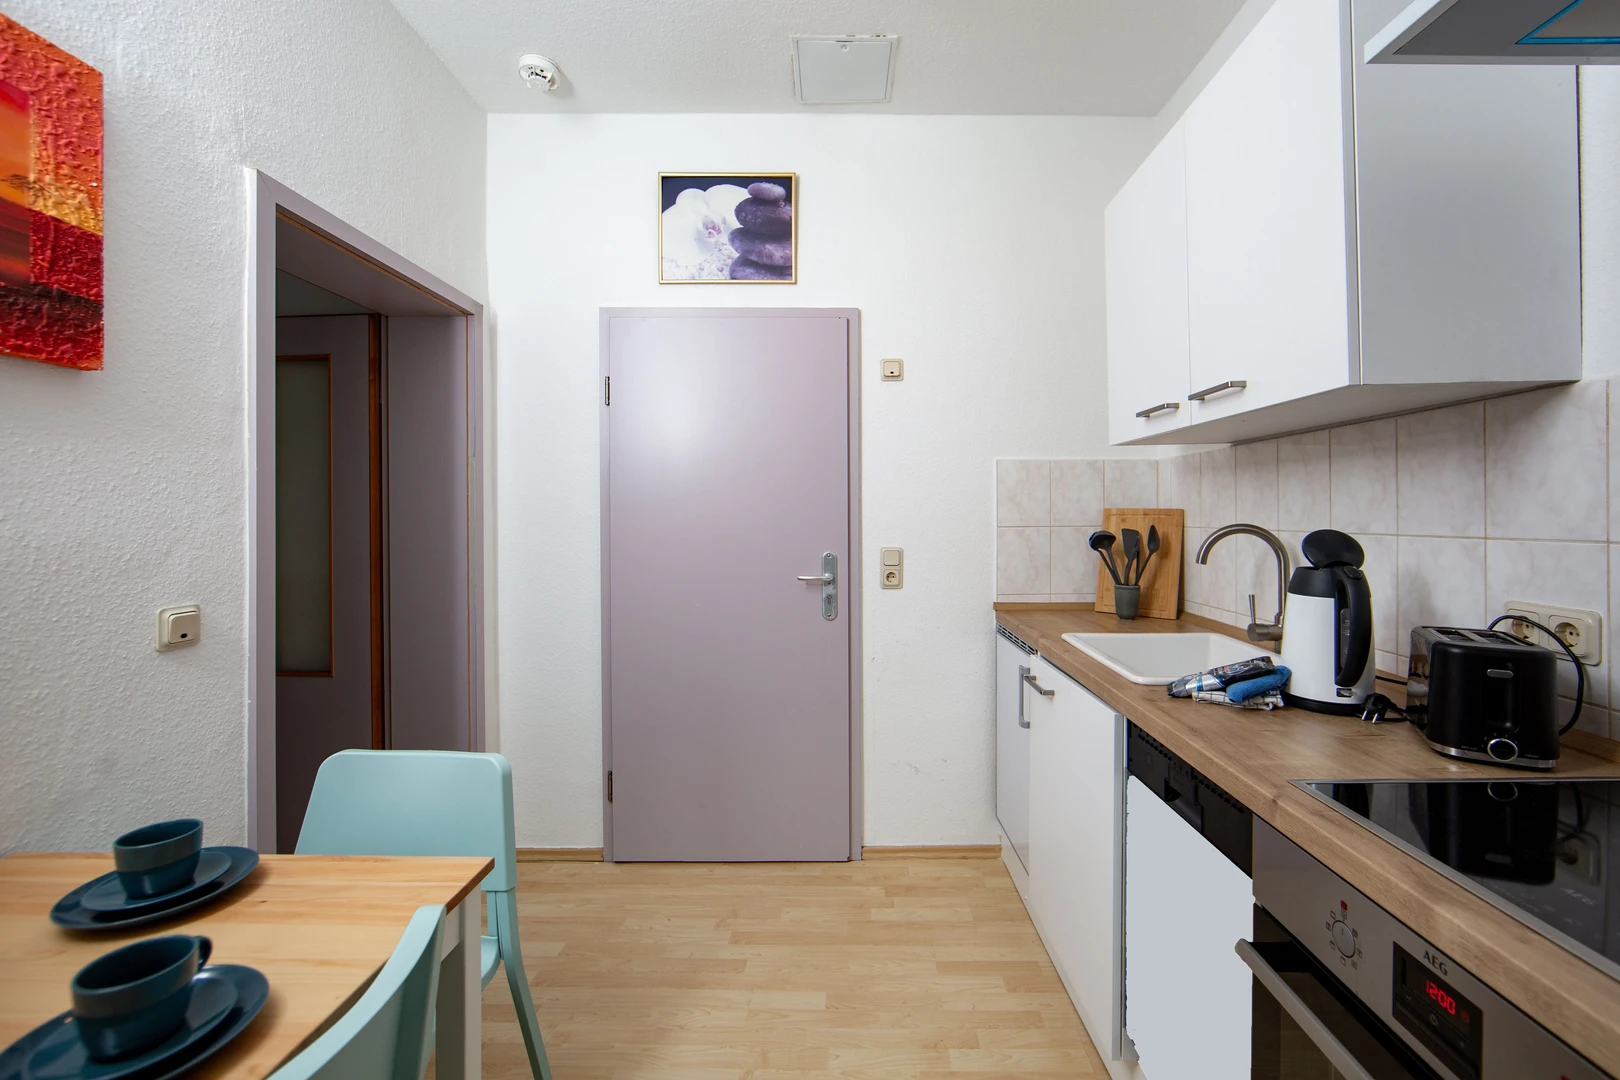 Renting rooms by the month in Erfurt